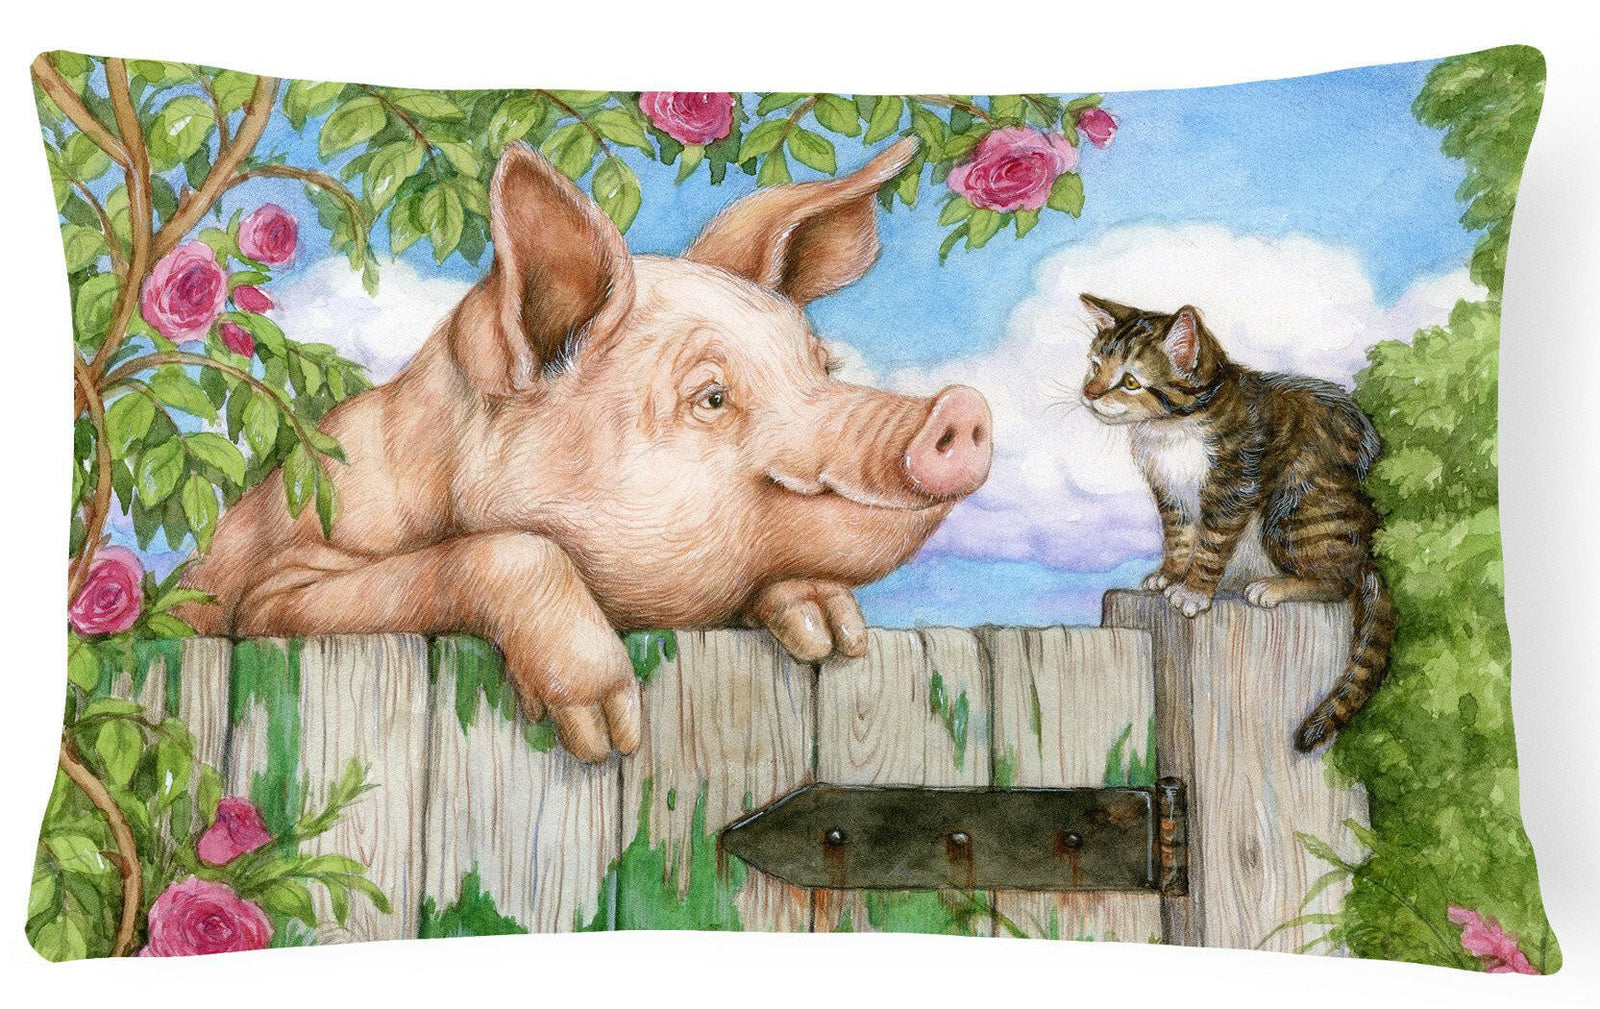 Pig at the Gate with the Cat Fabric Decorative Pillow CDCO0349PW1216 by Caroline's Treasures